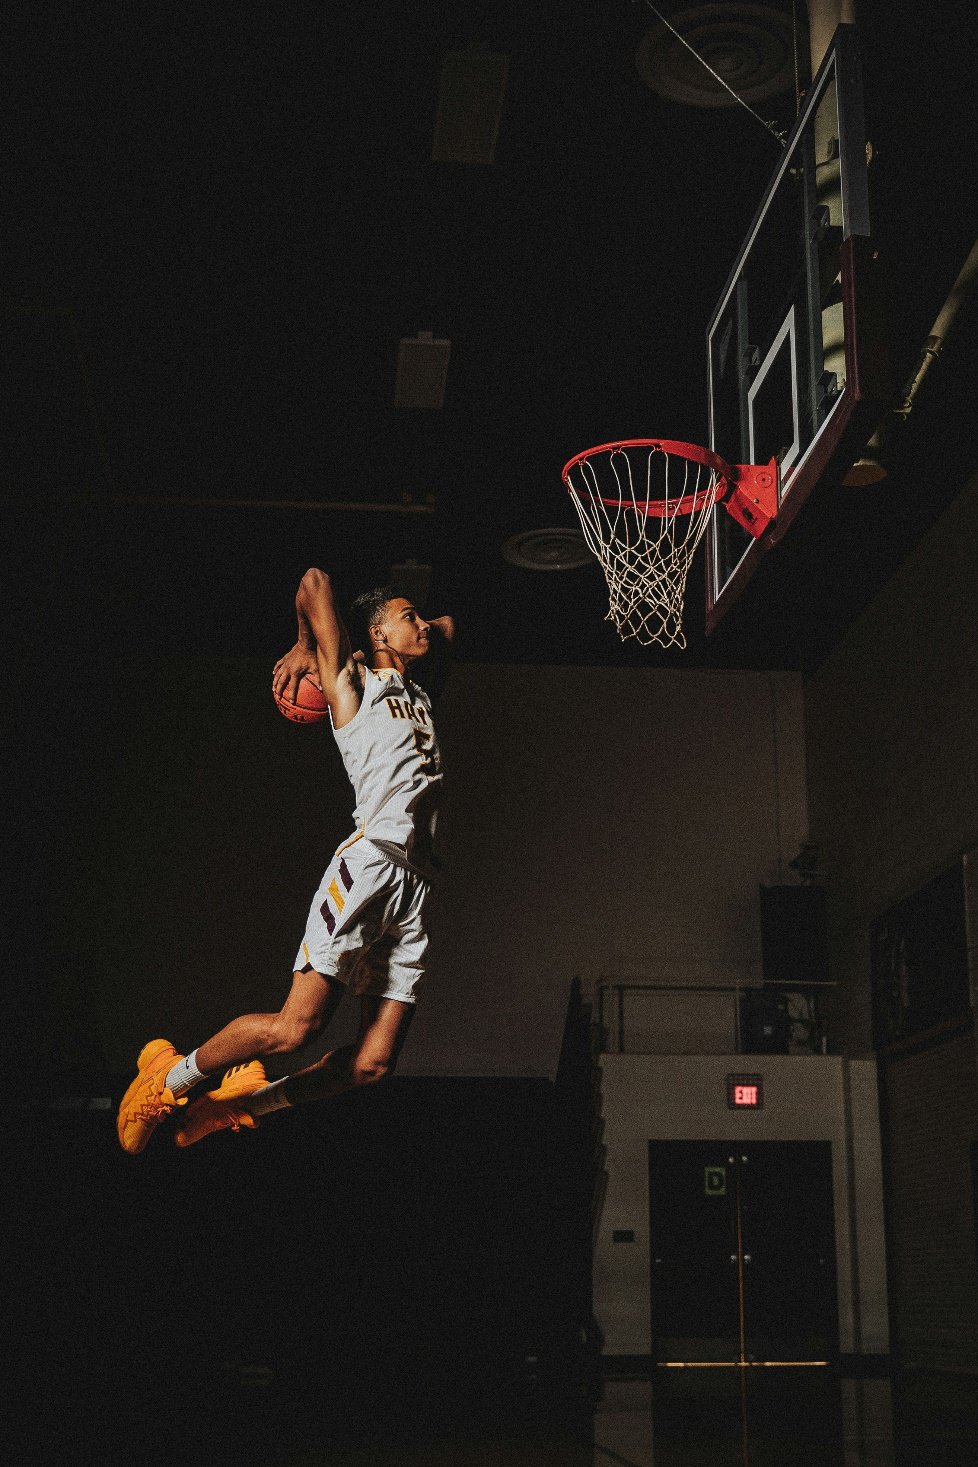 A person in mid-air for dunk.